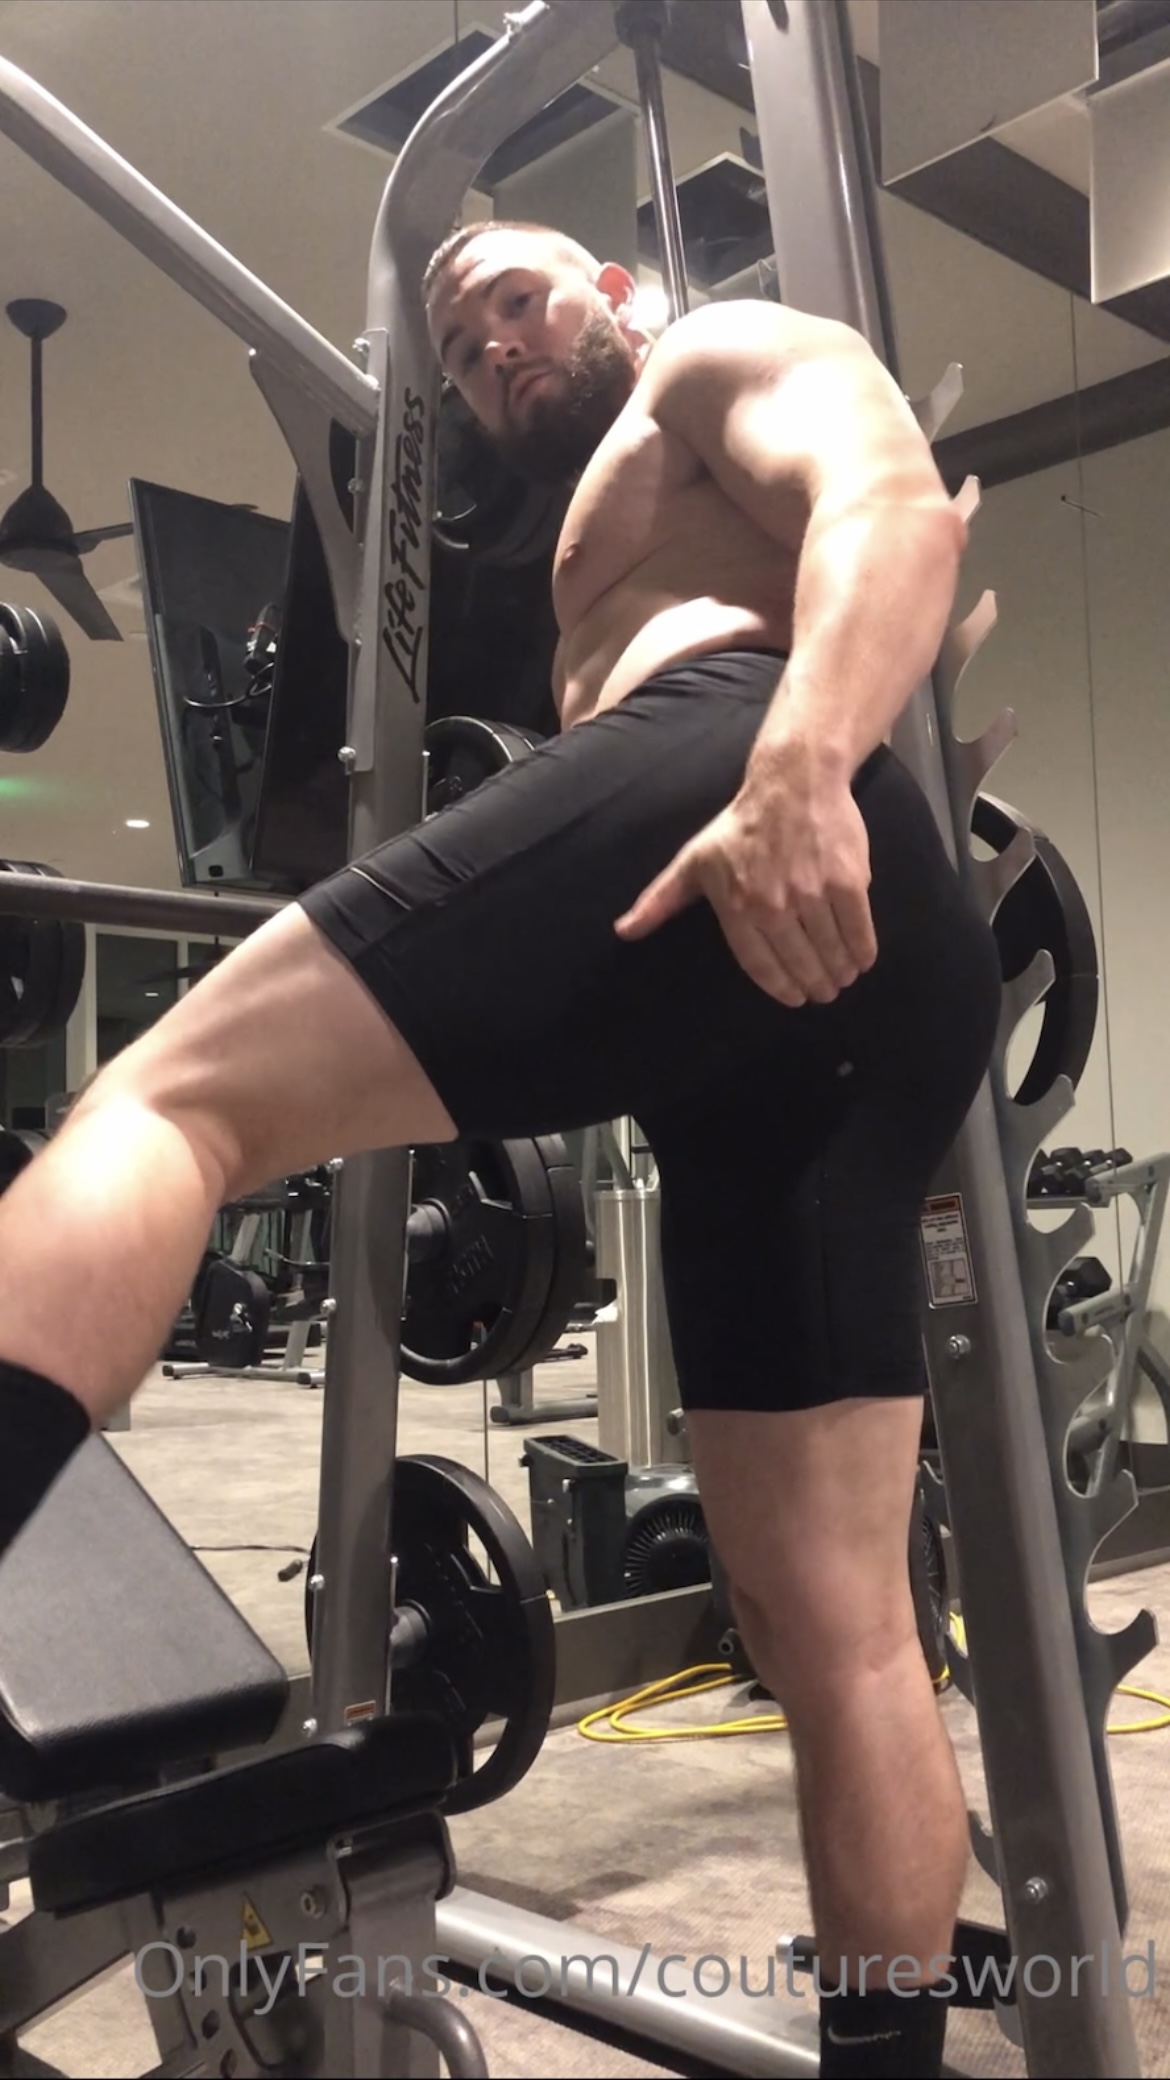 Beefy PAWB hunk daddy wears ripped lycra during workout - ThisVid.com